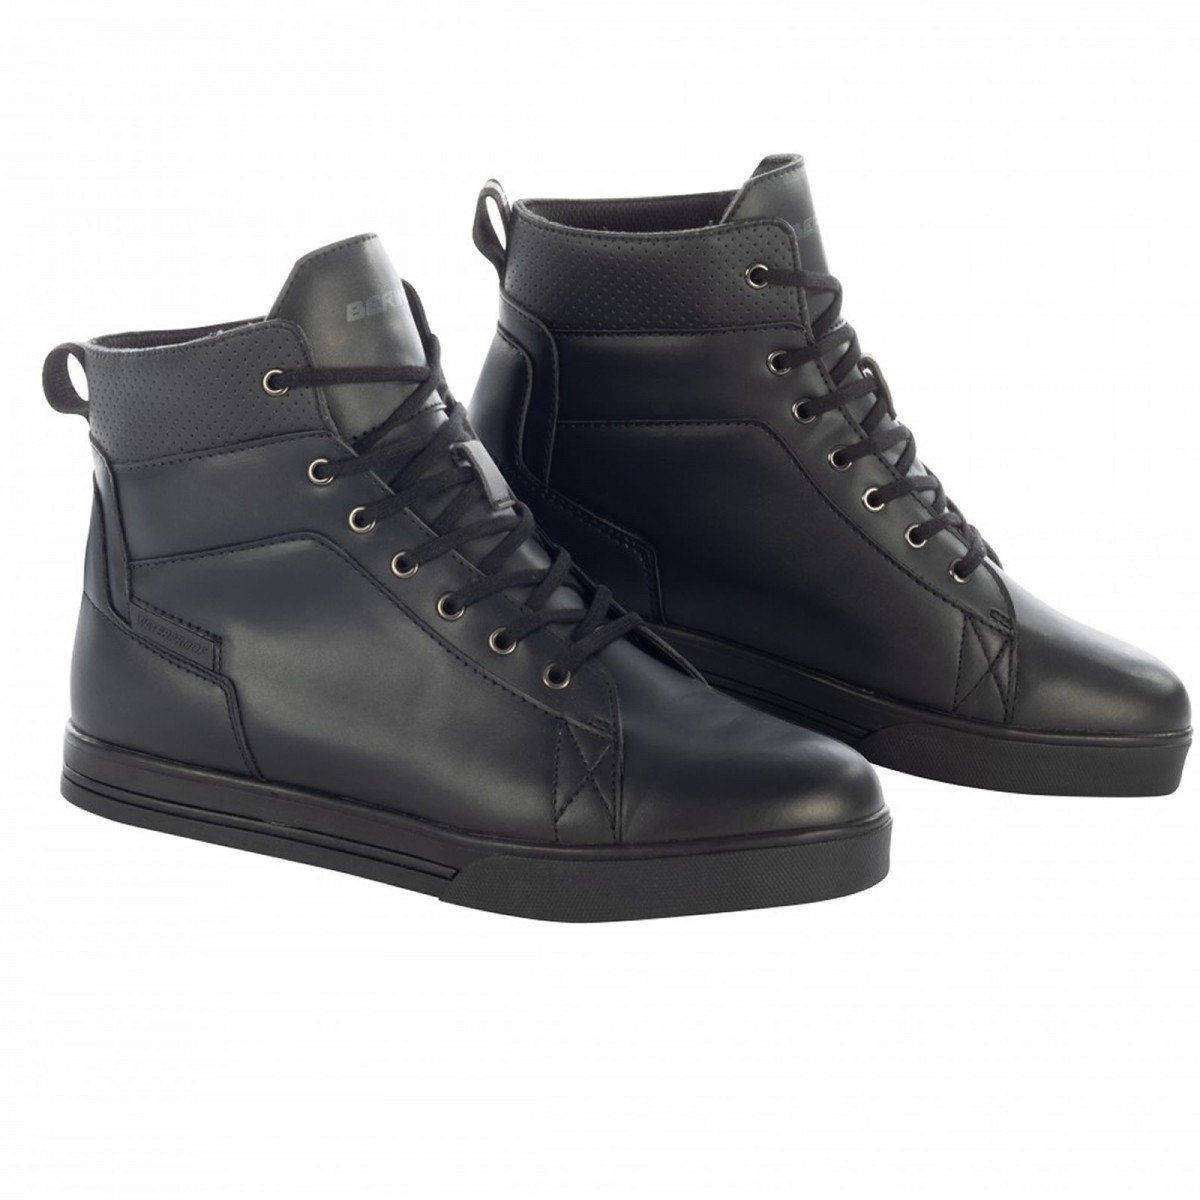 Image of Bering Sneakers Indy Black Talla 41